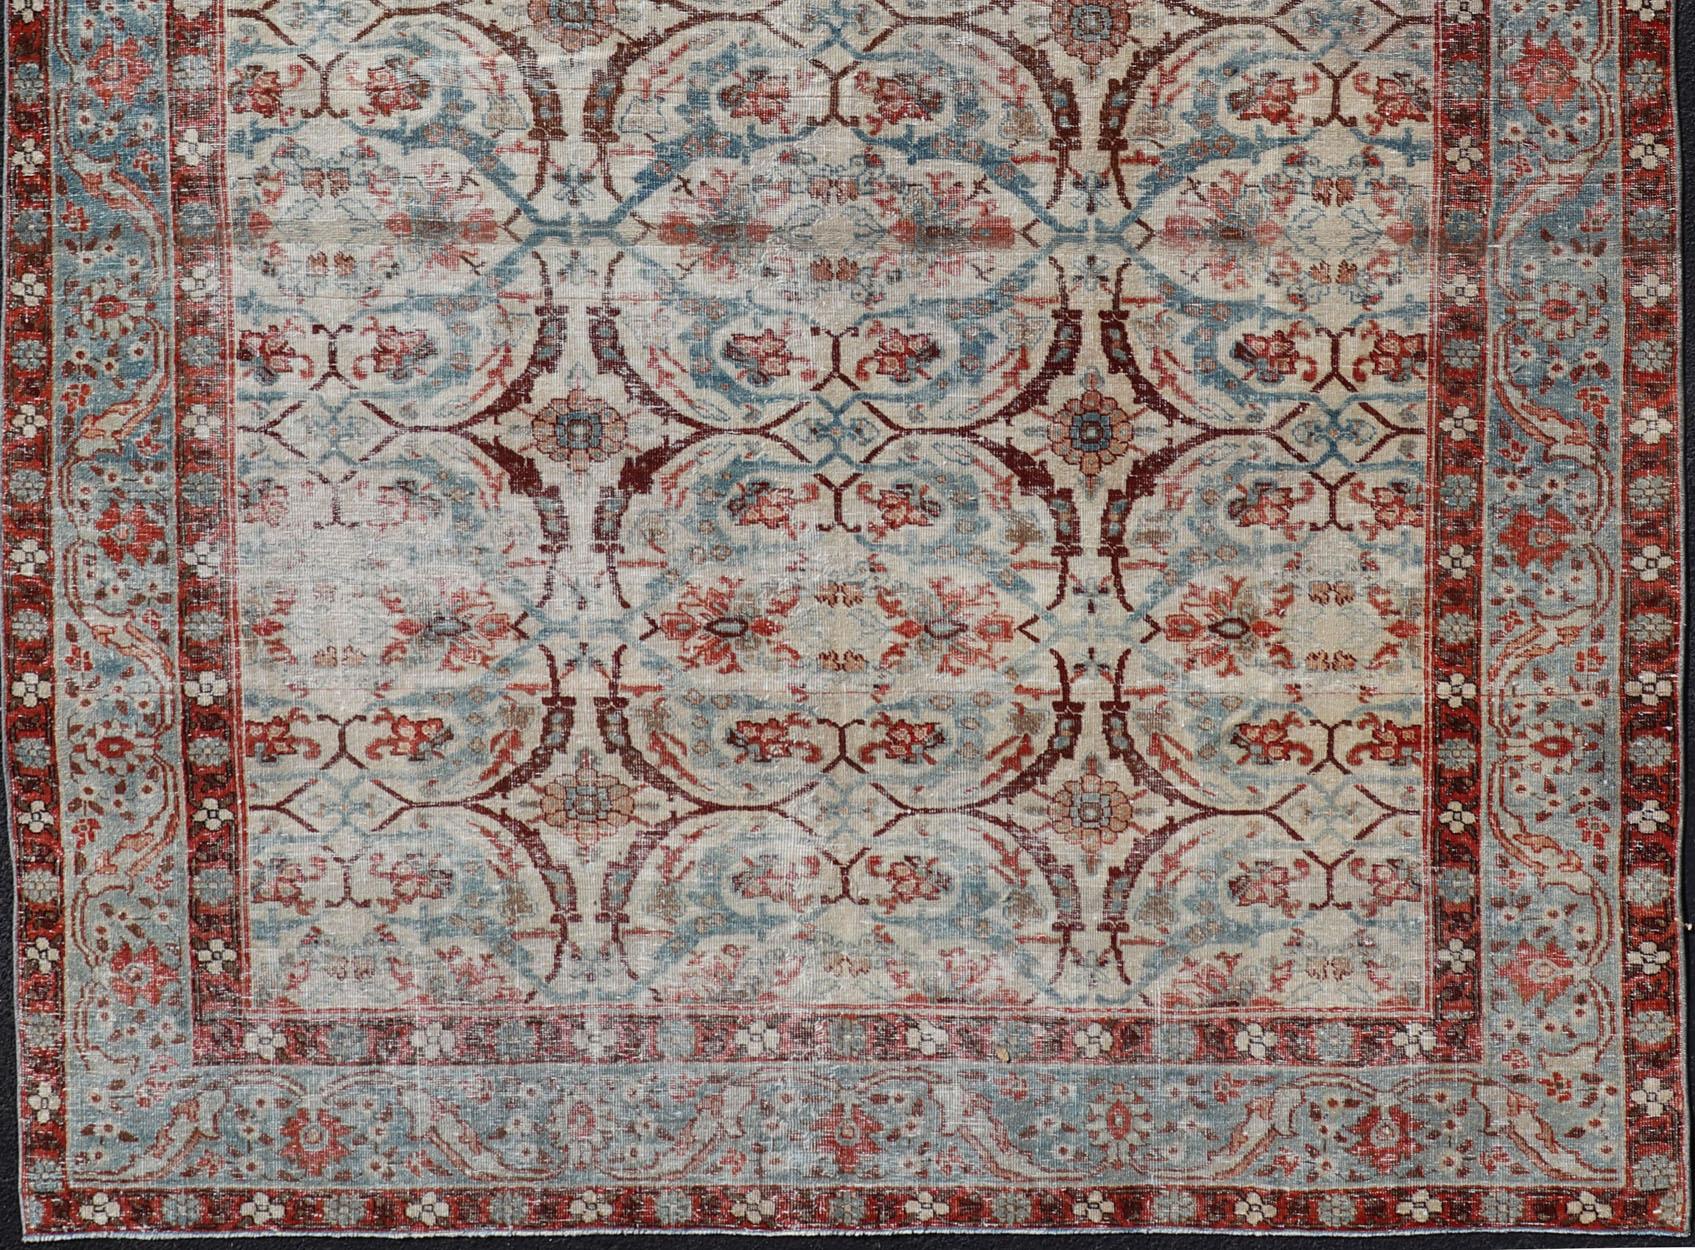 Antique Persian distressed Tabriz rug with all-over floral design in ivory, red, brown, light blue, rug EMB-8507 , country of origin / type: Iran / Tabriz, circa 1920

This distressed antique Persian Tabriz carpet features a refined palate of